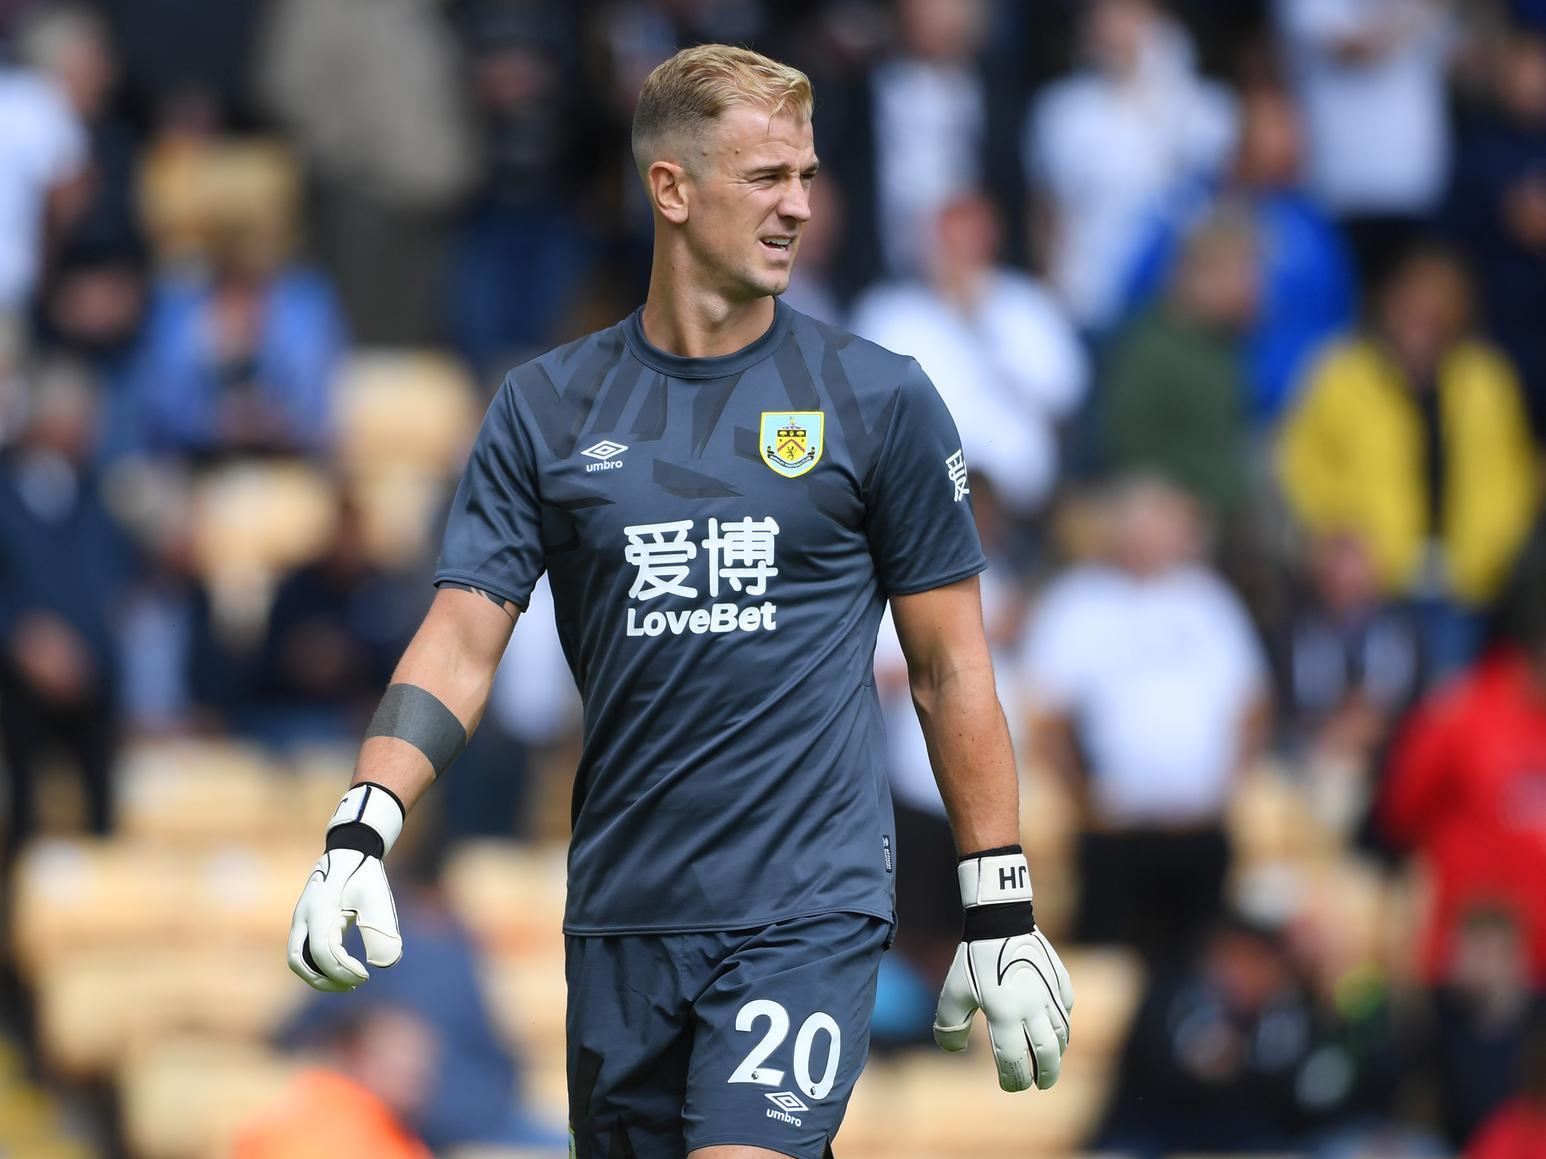 The Burnley goalkeeper was merely a spectator for most of the FA Cup tie. The former England international did everything expected of him, but was left exposed by Lowton for Toney's consolation.